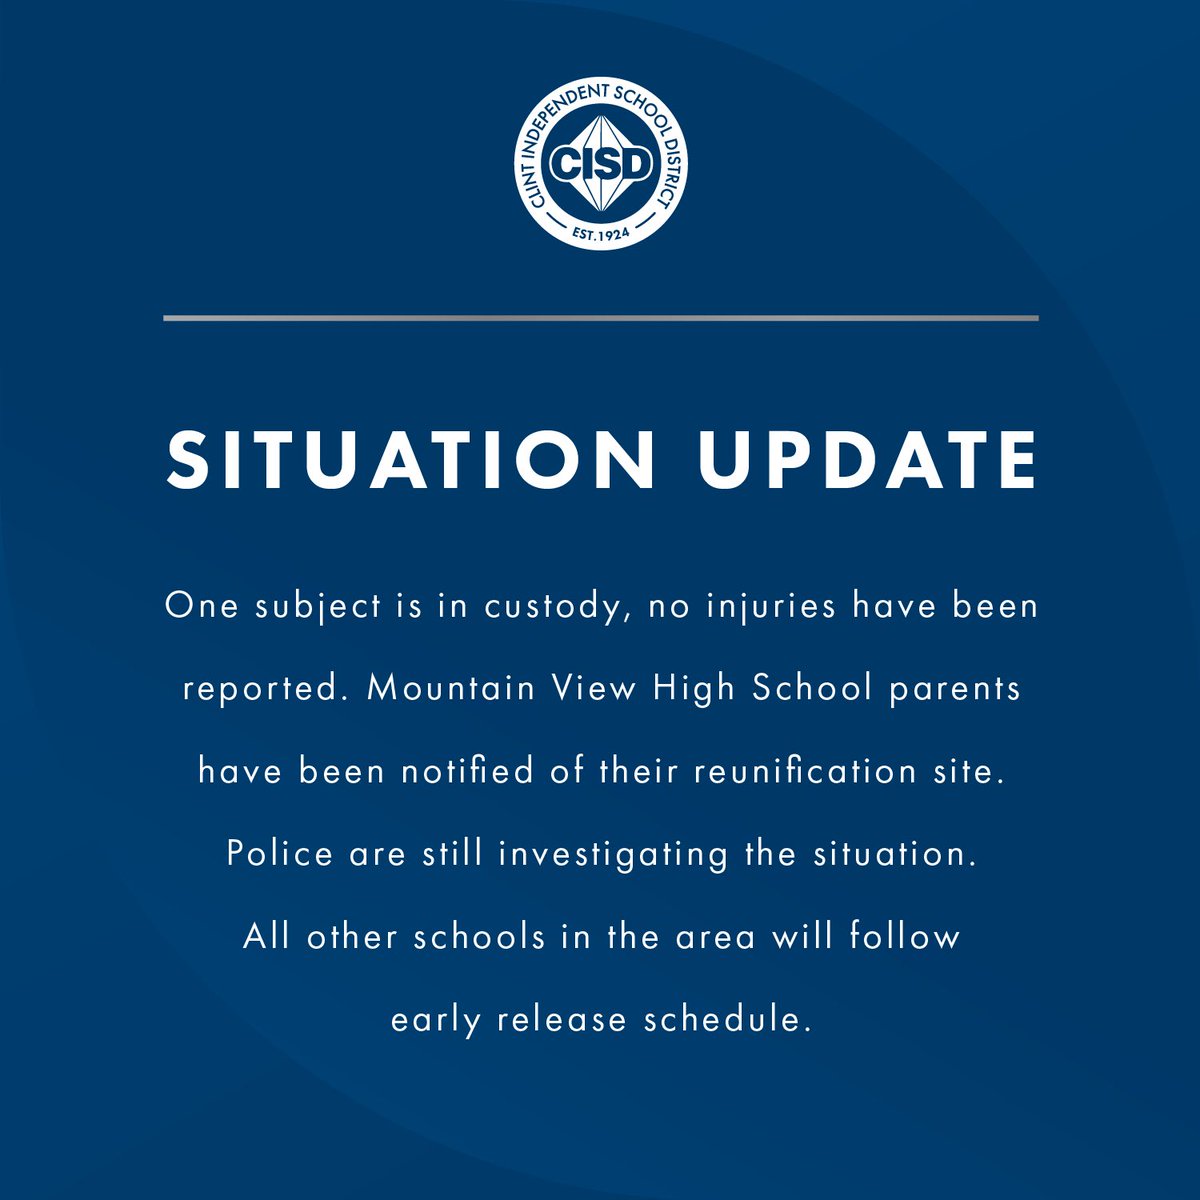 One subject is in custody, no injuries have been reported. Mountain View High School parents have been notified of their reunification site. Police are still investigating the situation. All other schools in the area will follow early release schedule.